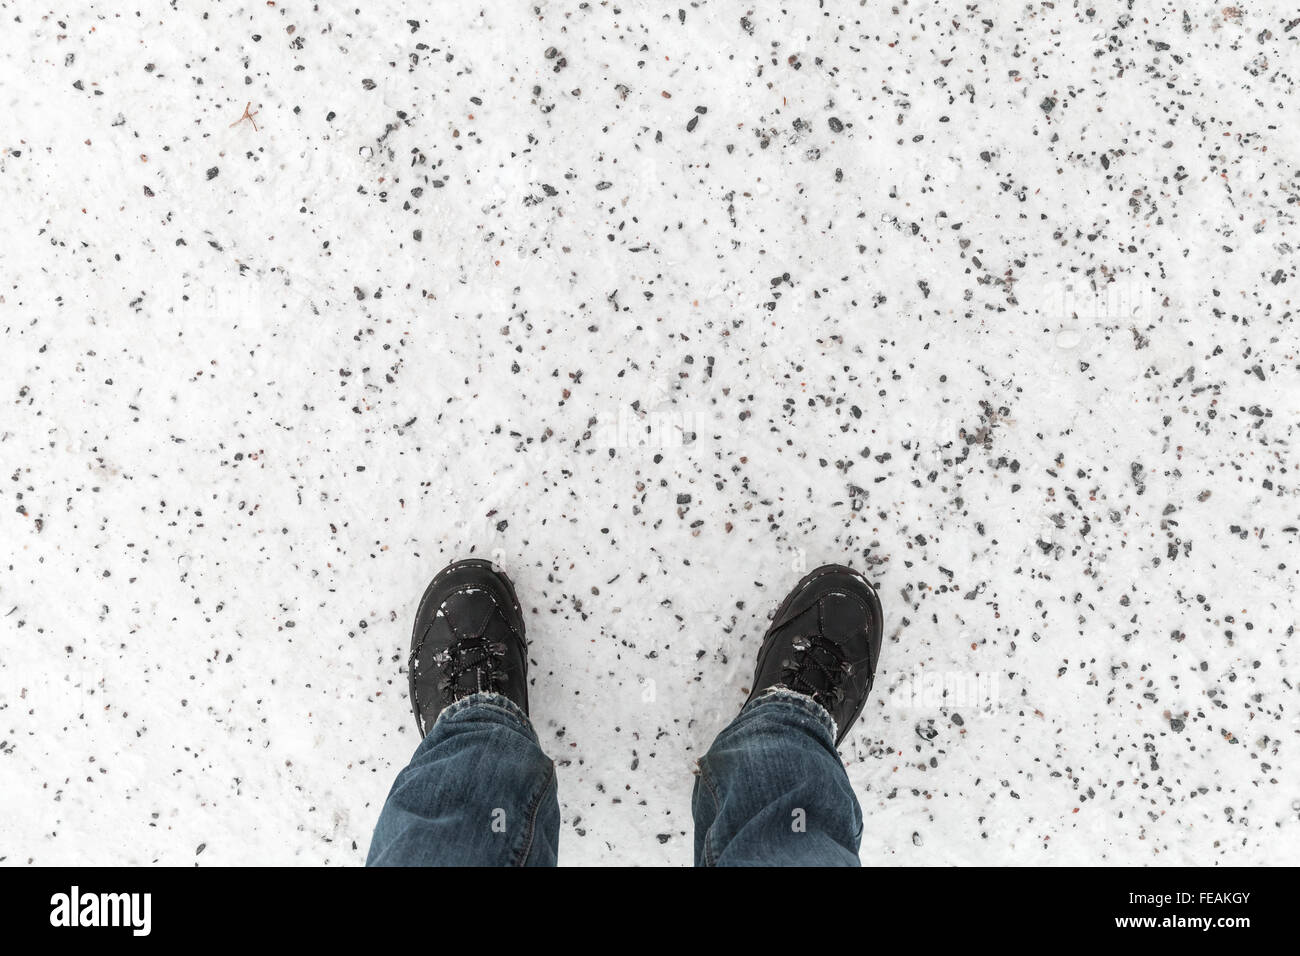 Male feet in blue jeans and black shoes standing on snowy winter road with anti-slip granite chippings, first person view Stock Photo